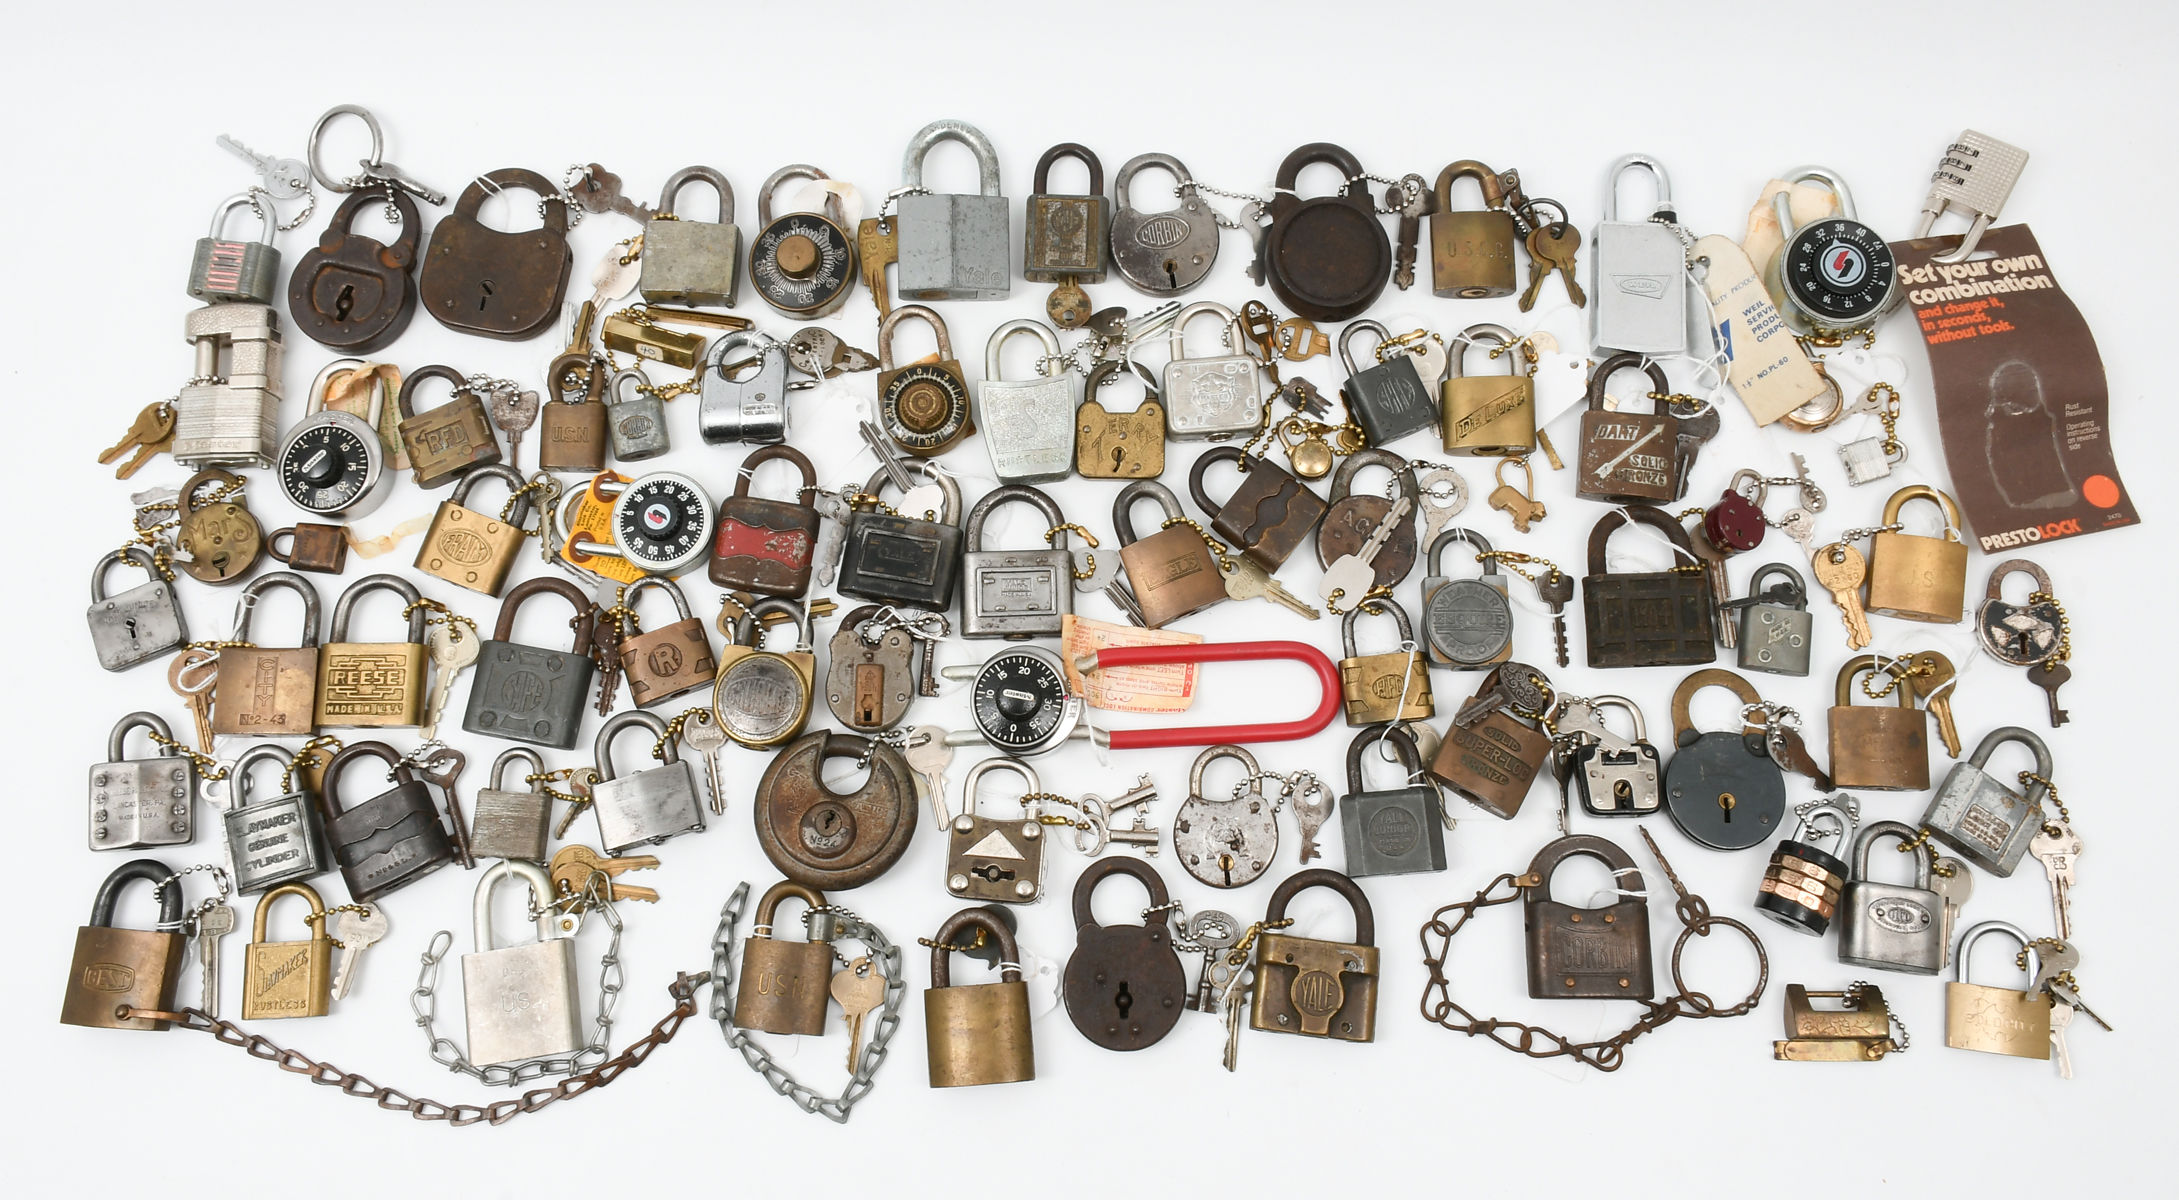 LARGE COLLECTION OF LOCKS: A large collection